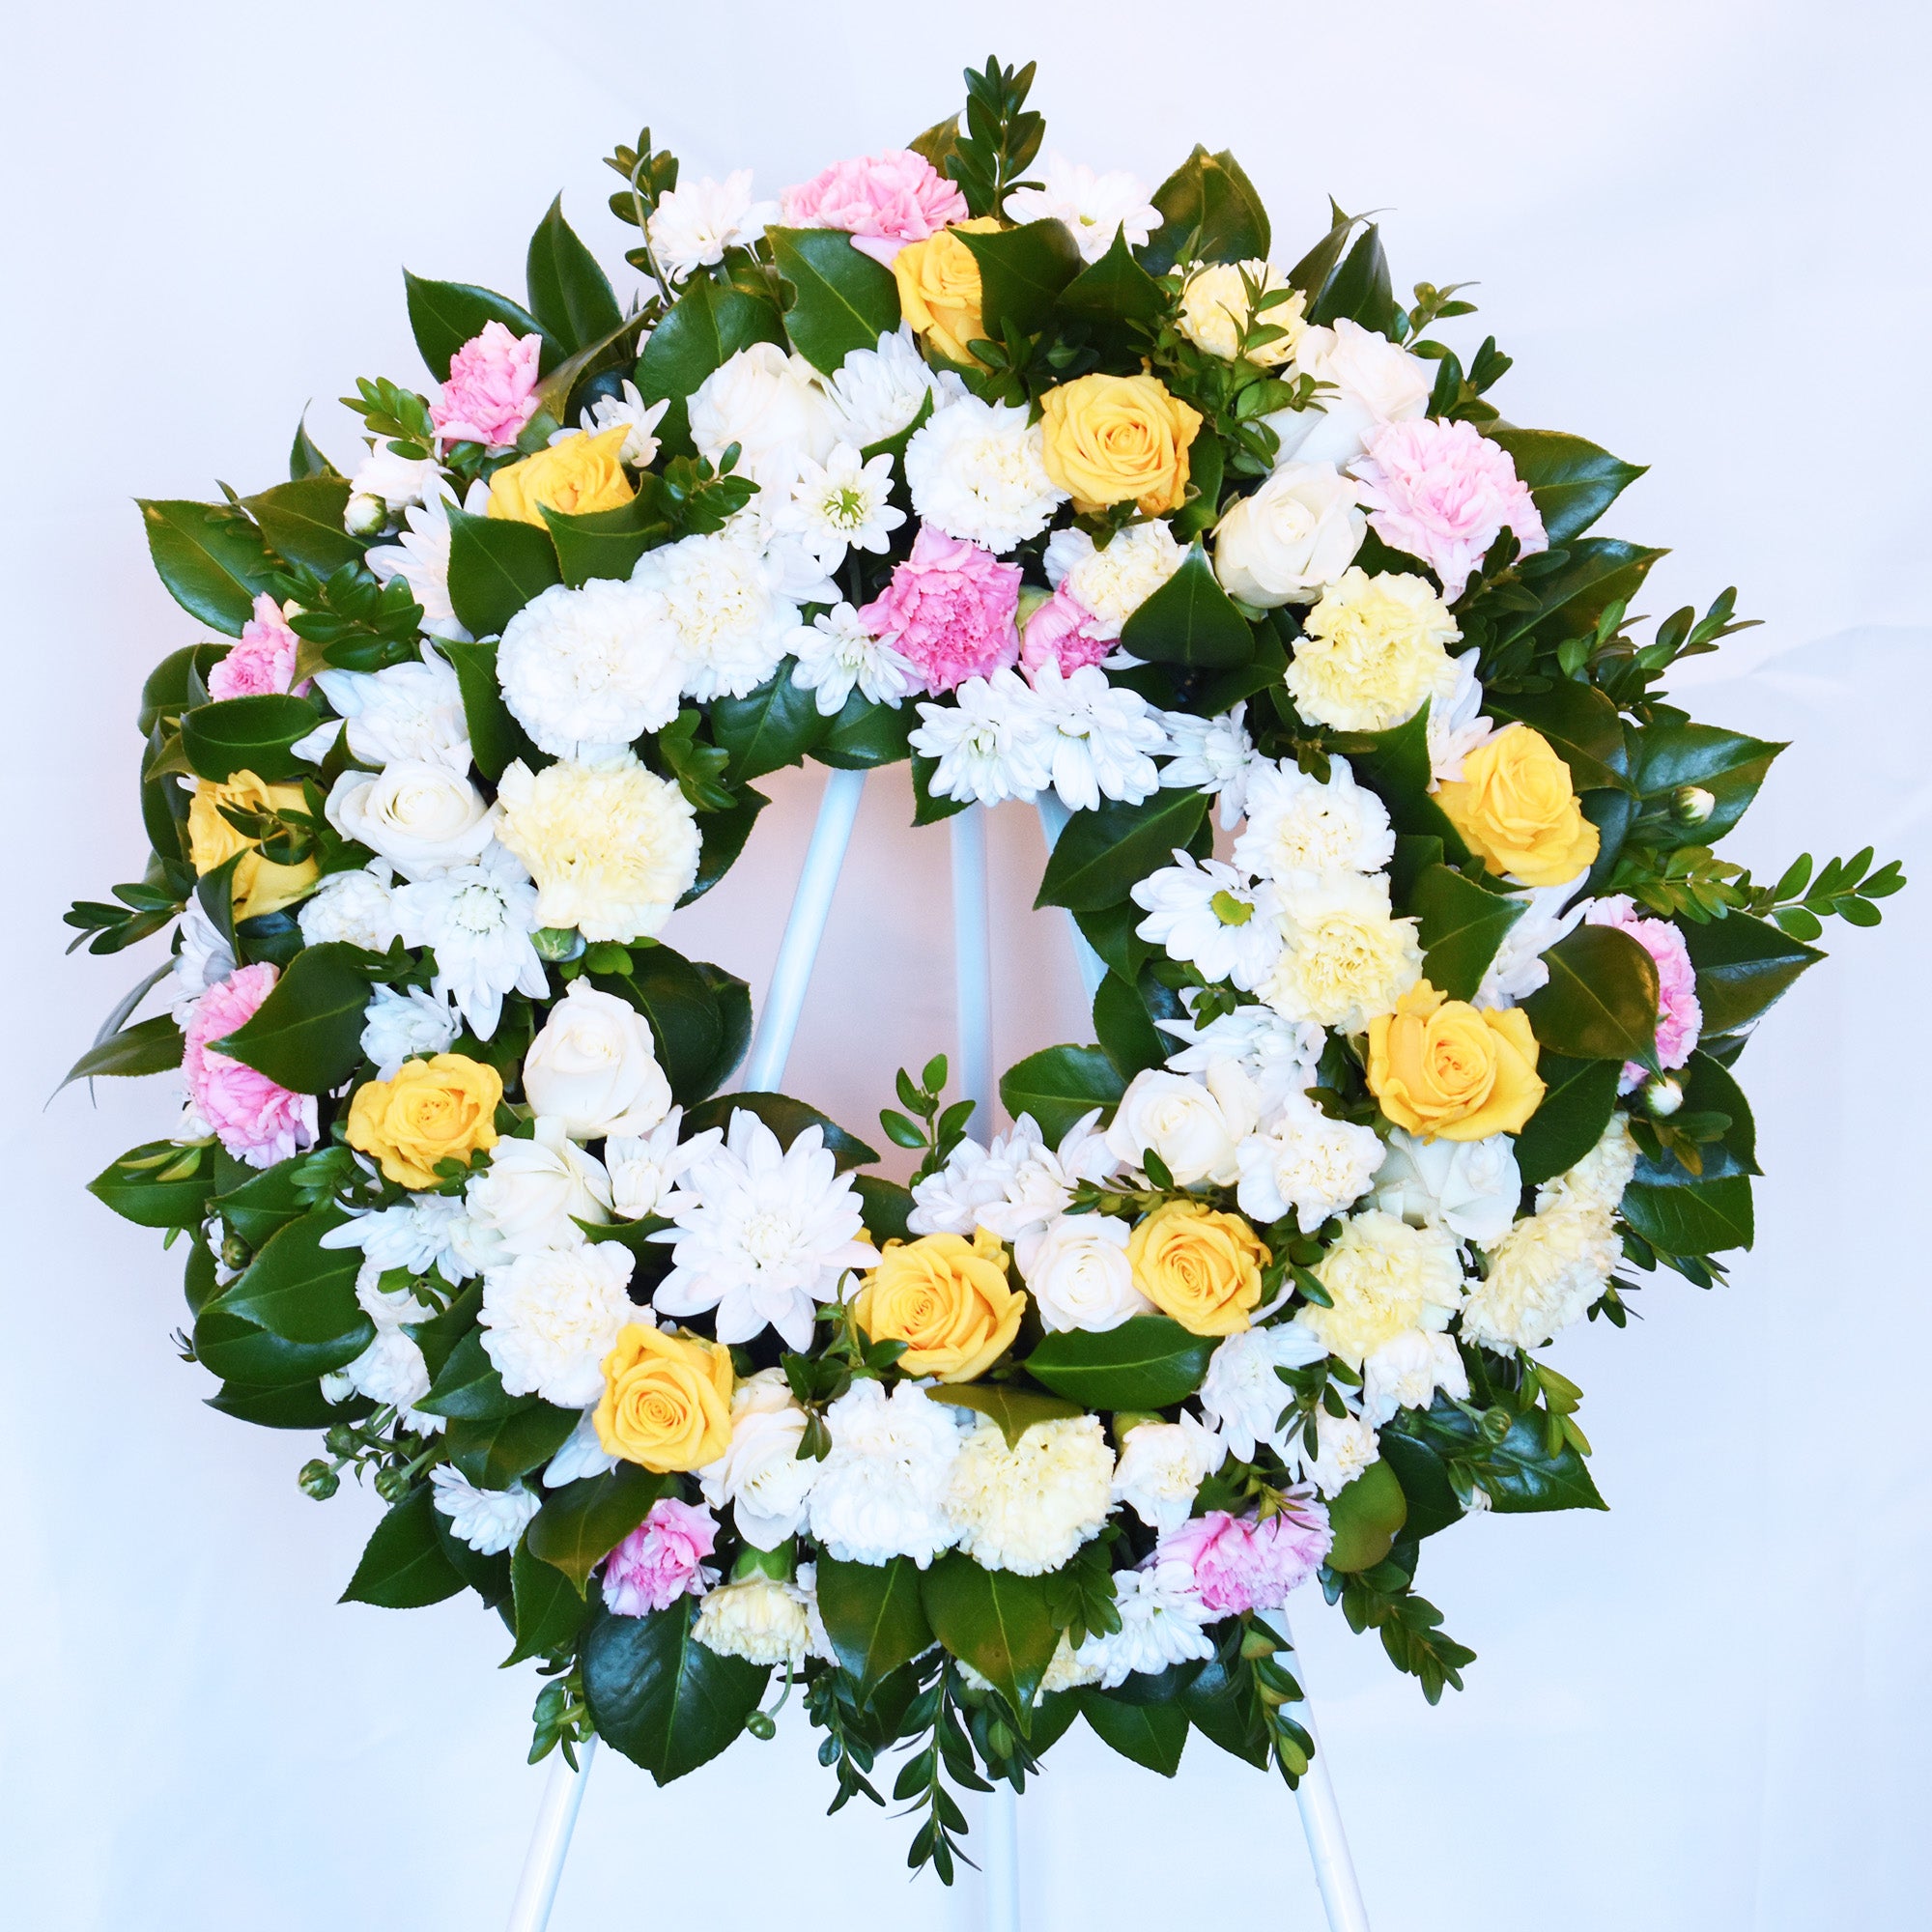 Strawberry and Banana Smoothie Funeral Flower Wreath